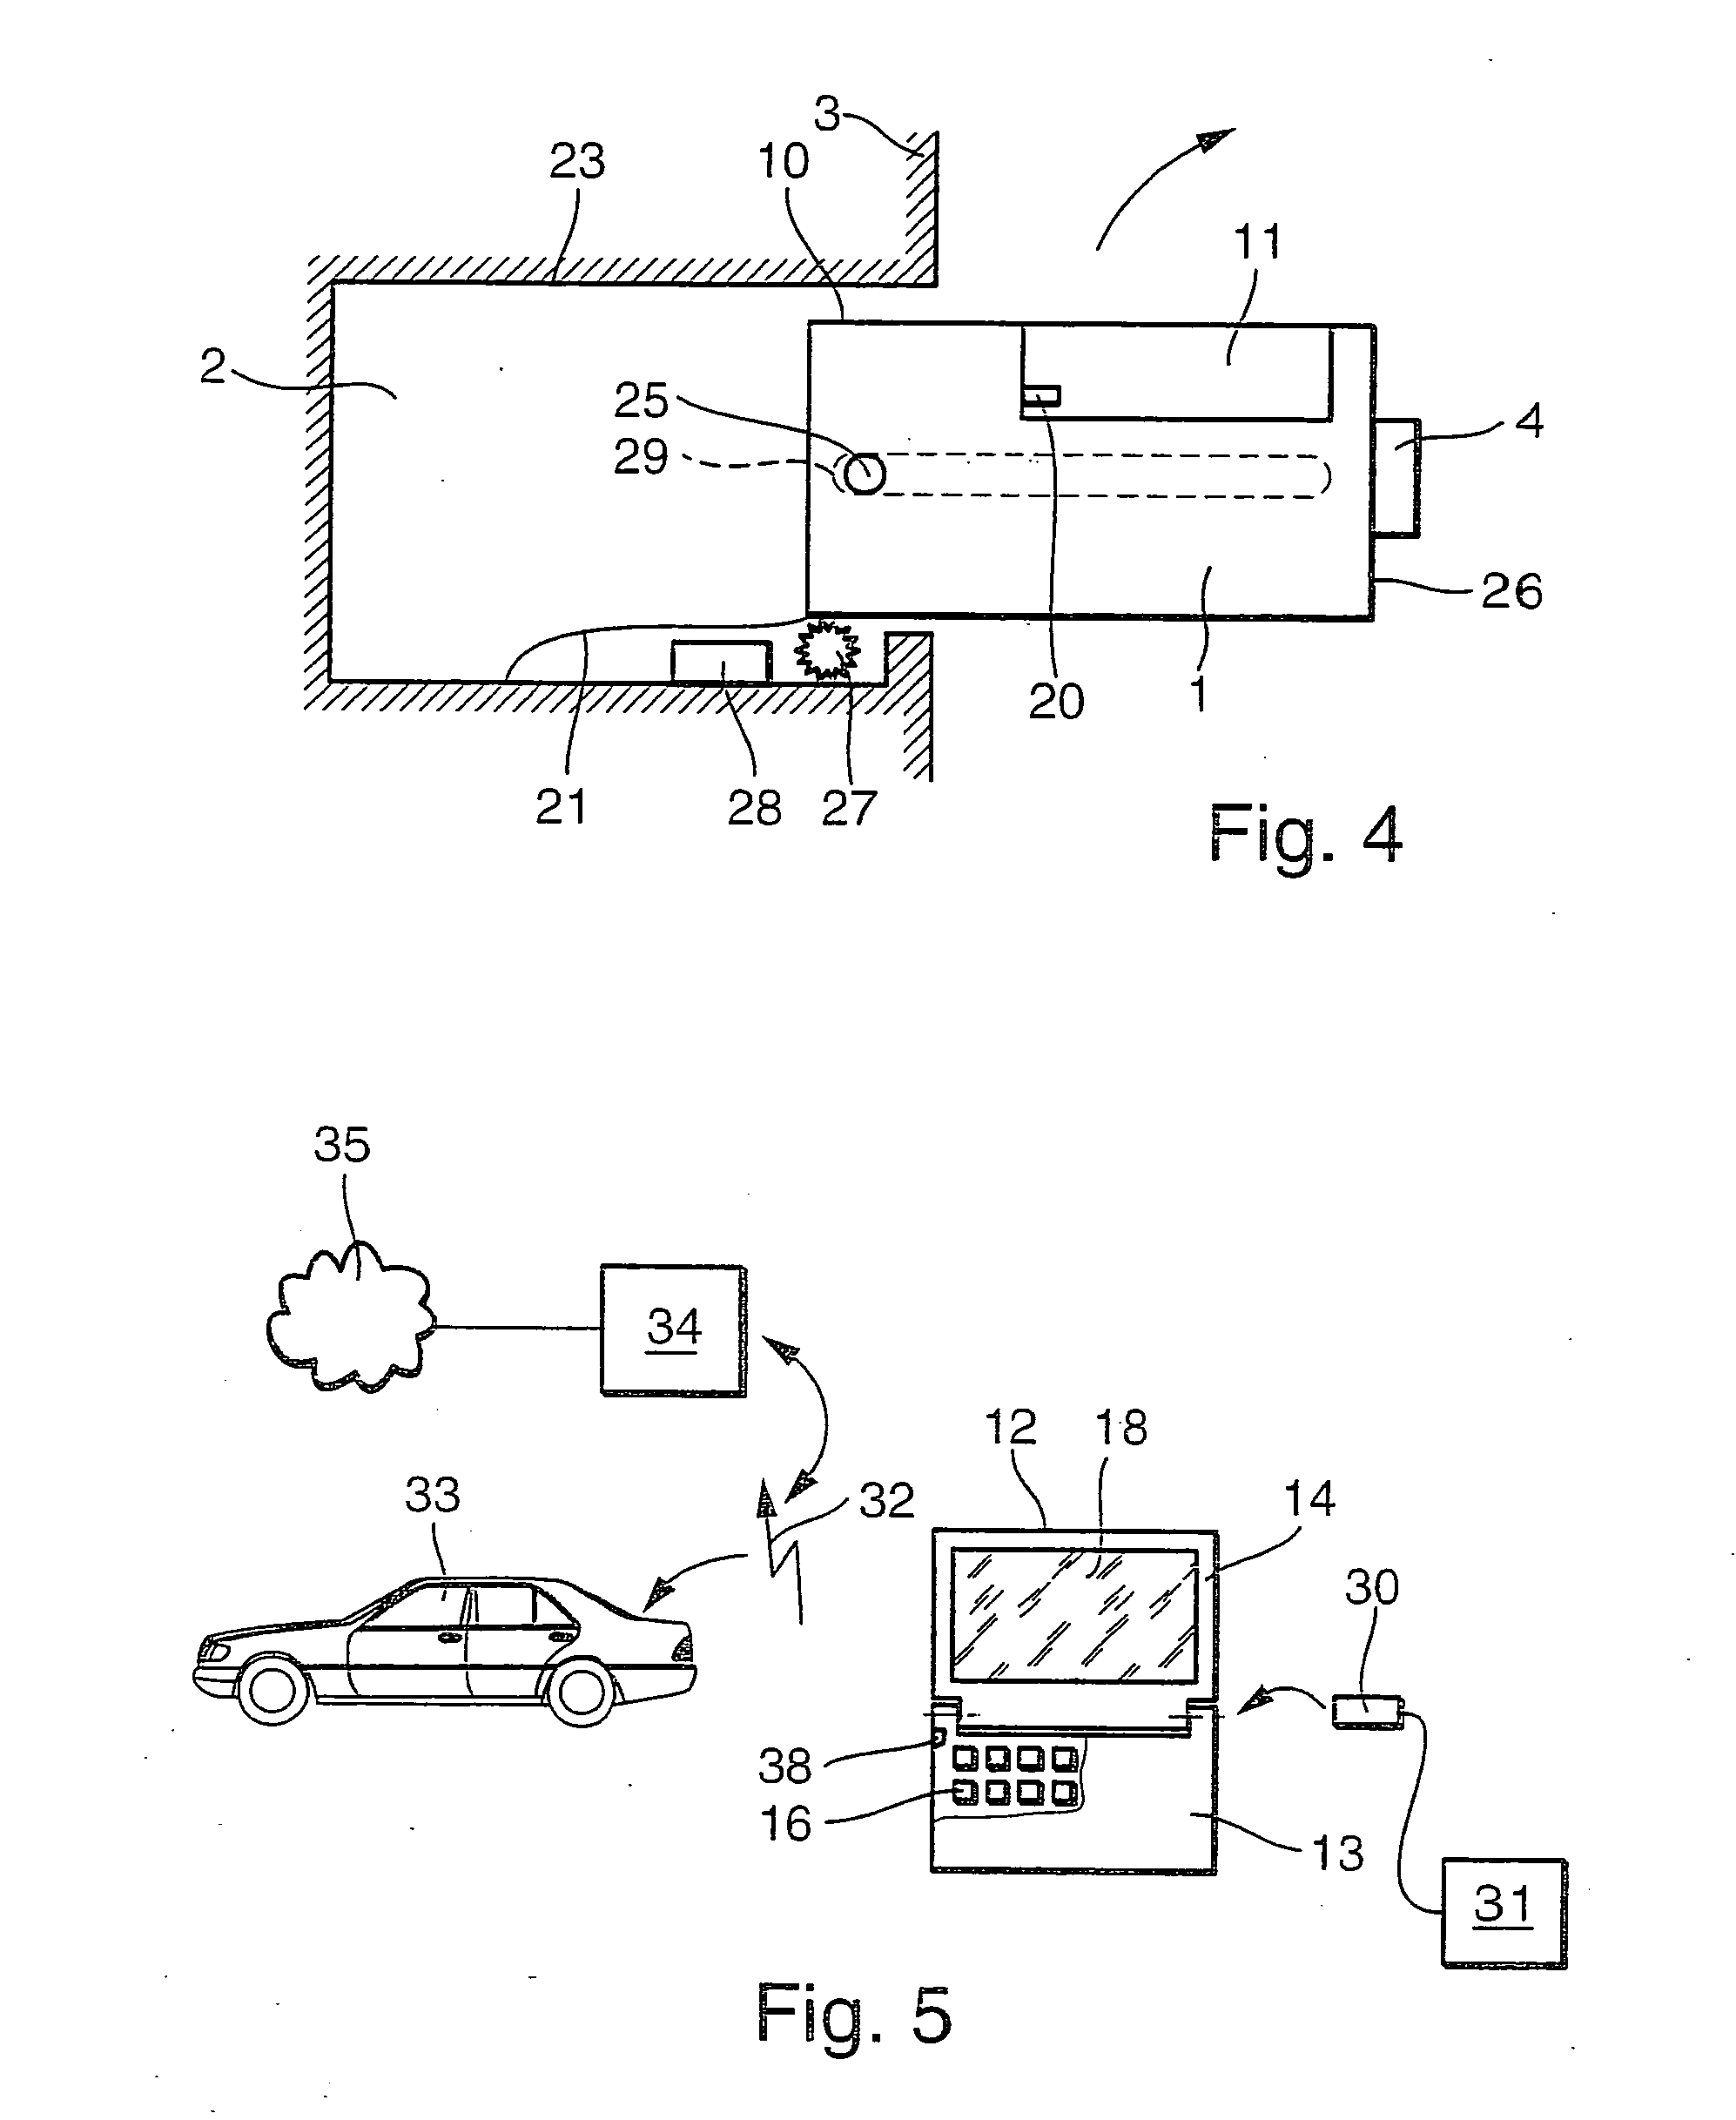 Retaining element for a portable computer device